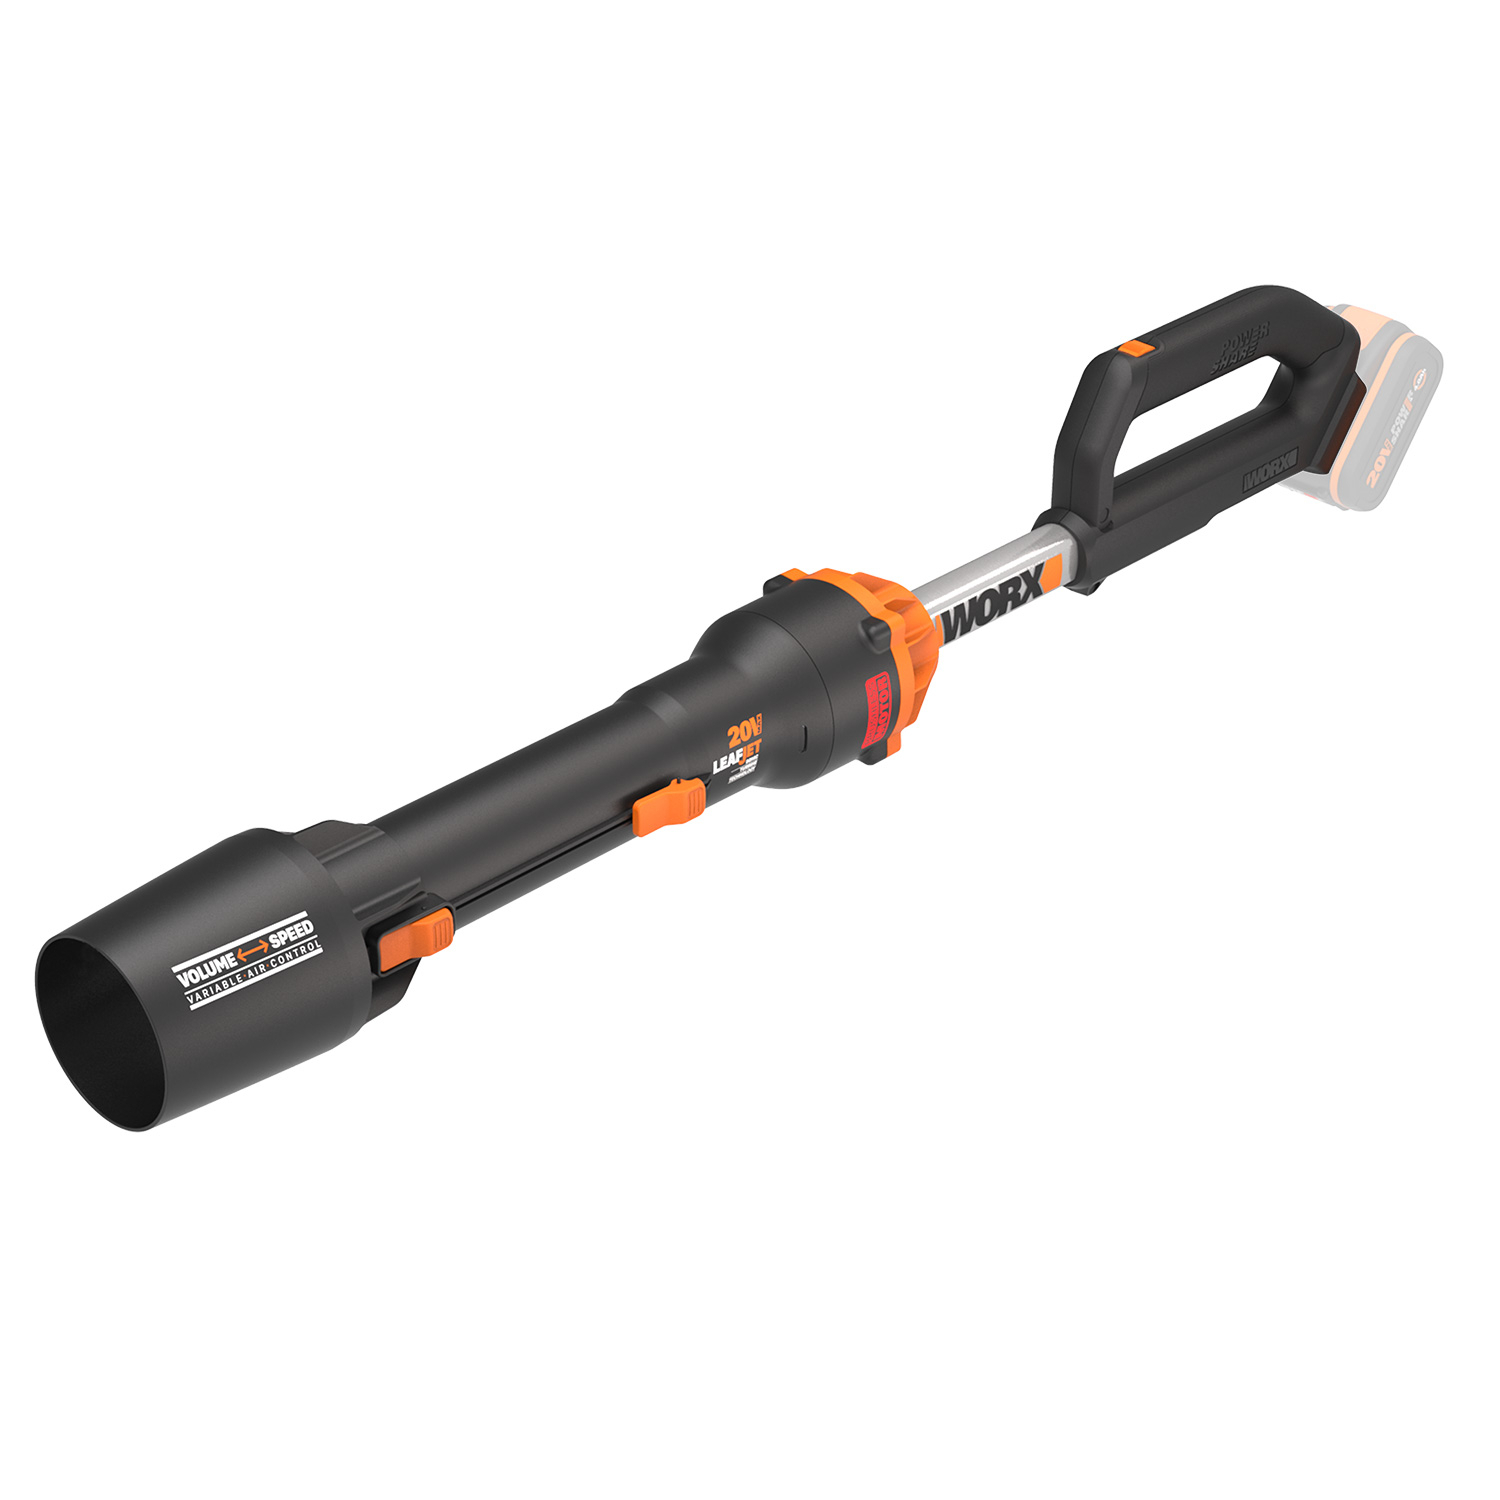 WORX 20V Brushless Leaf Jet Blower (Tool Only - Battery / Charger sold separately)